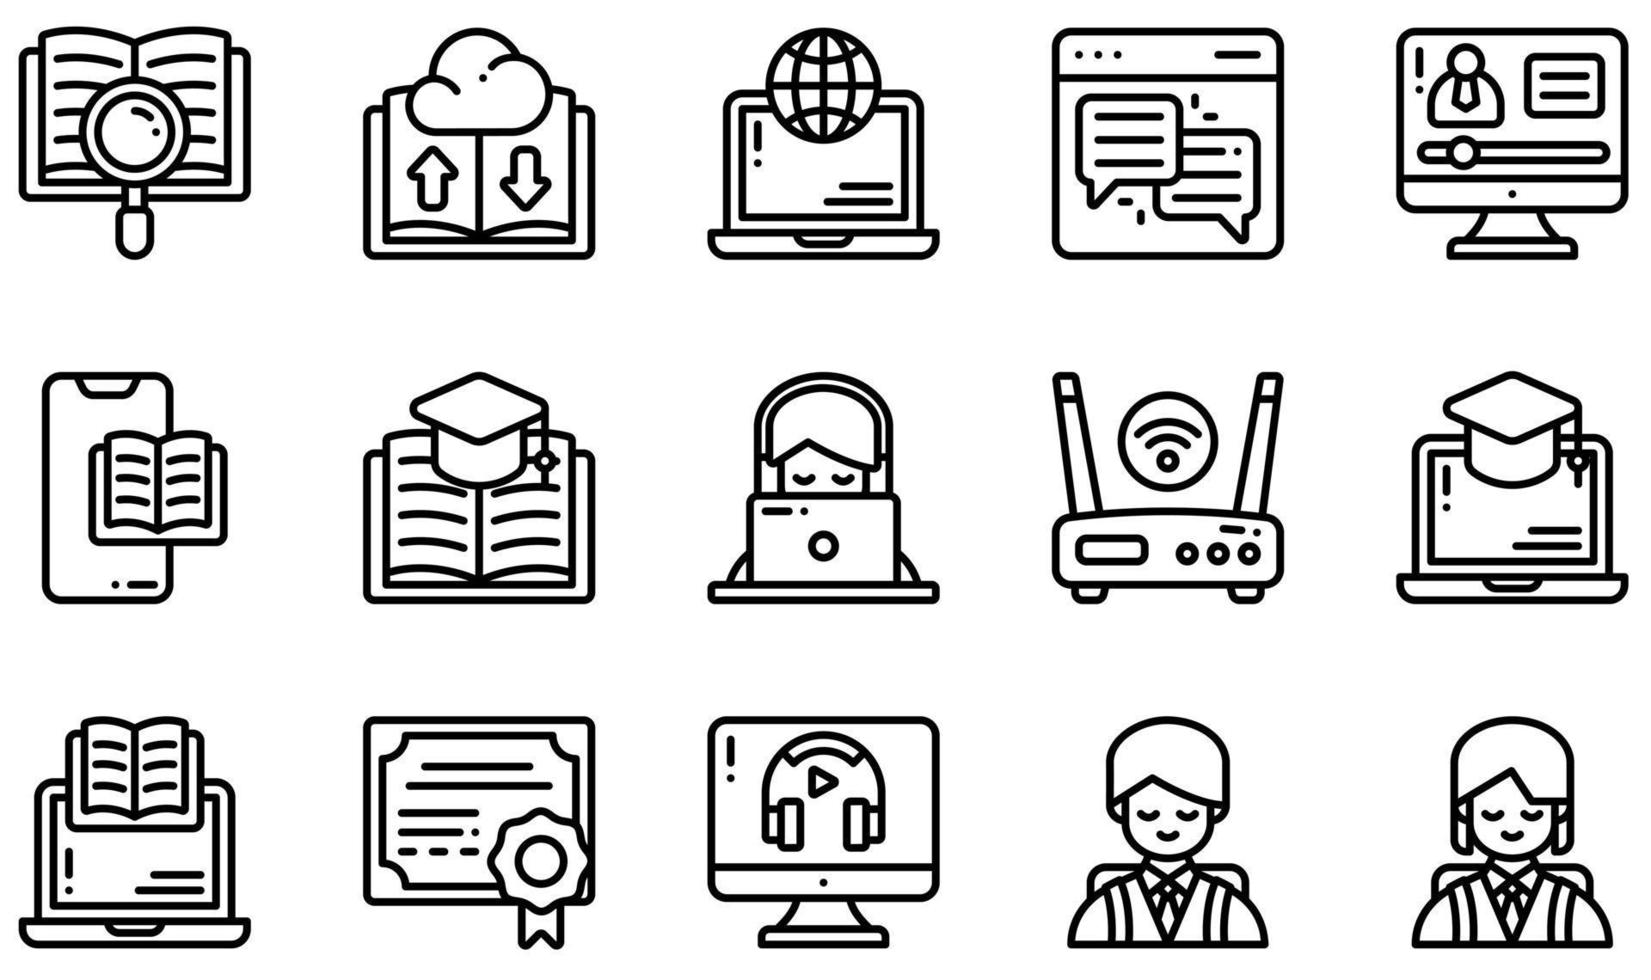 Set of Vector Icons Related to Online Learning. Contains such Icons as Interactive, Learning, Listening, Online Education, Online Learning, Student and more.